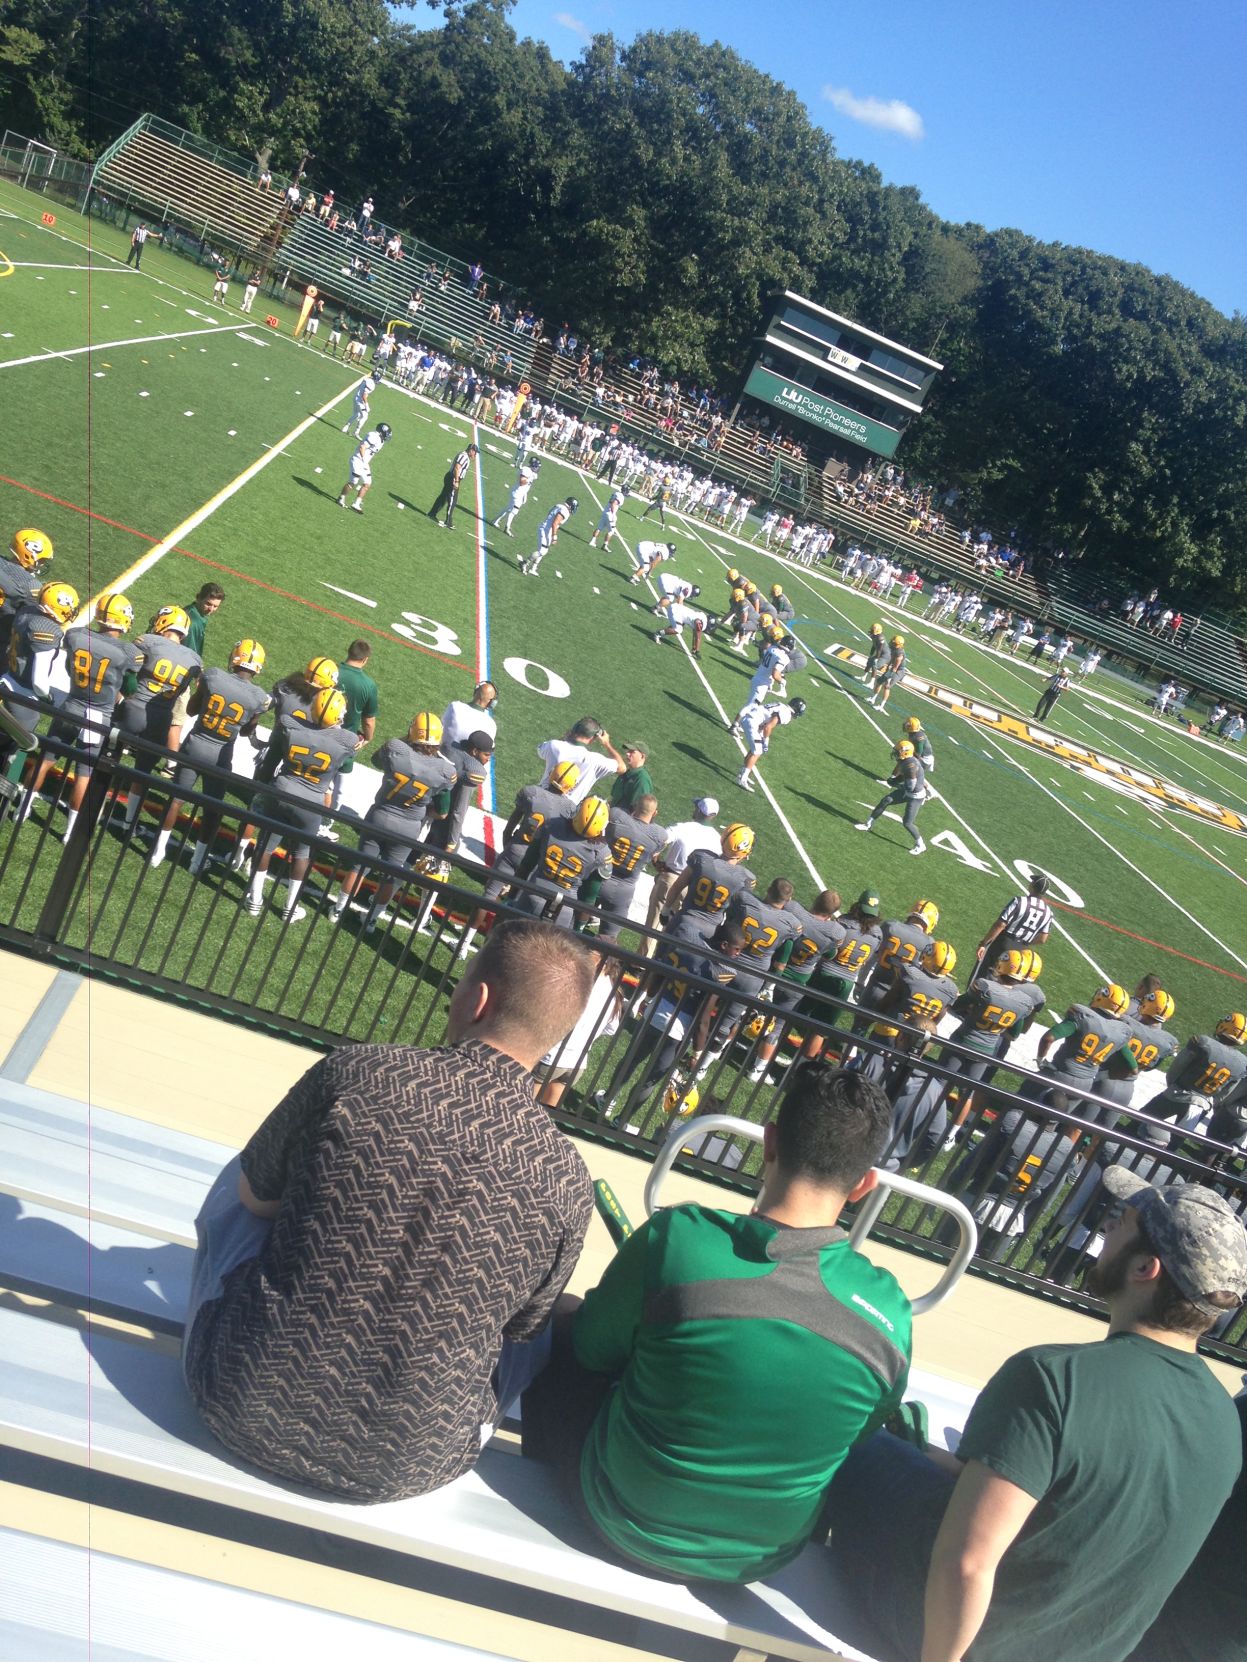 LIU Post wins on field goal as time expires